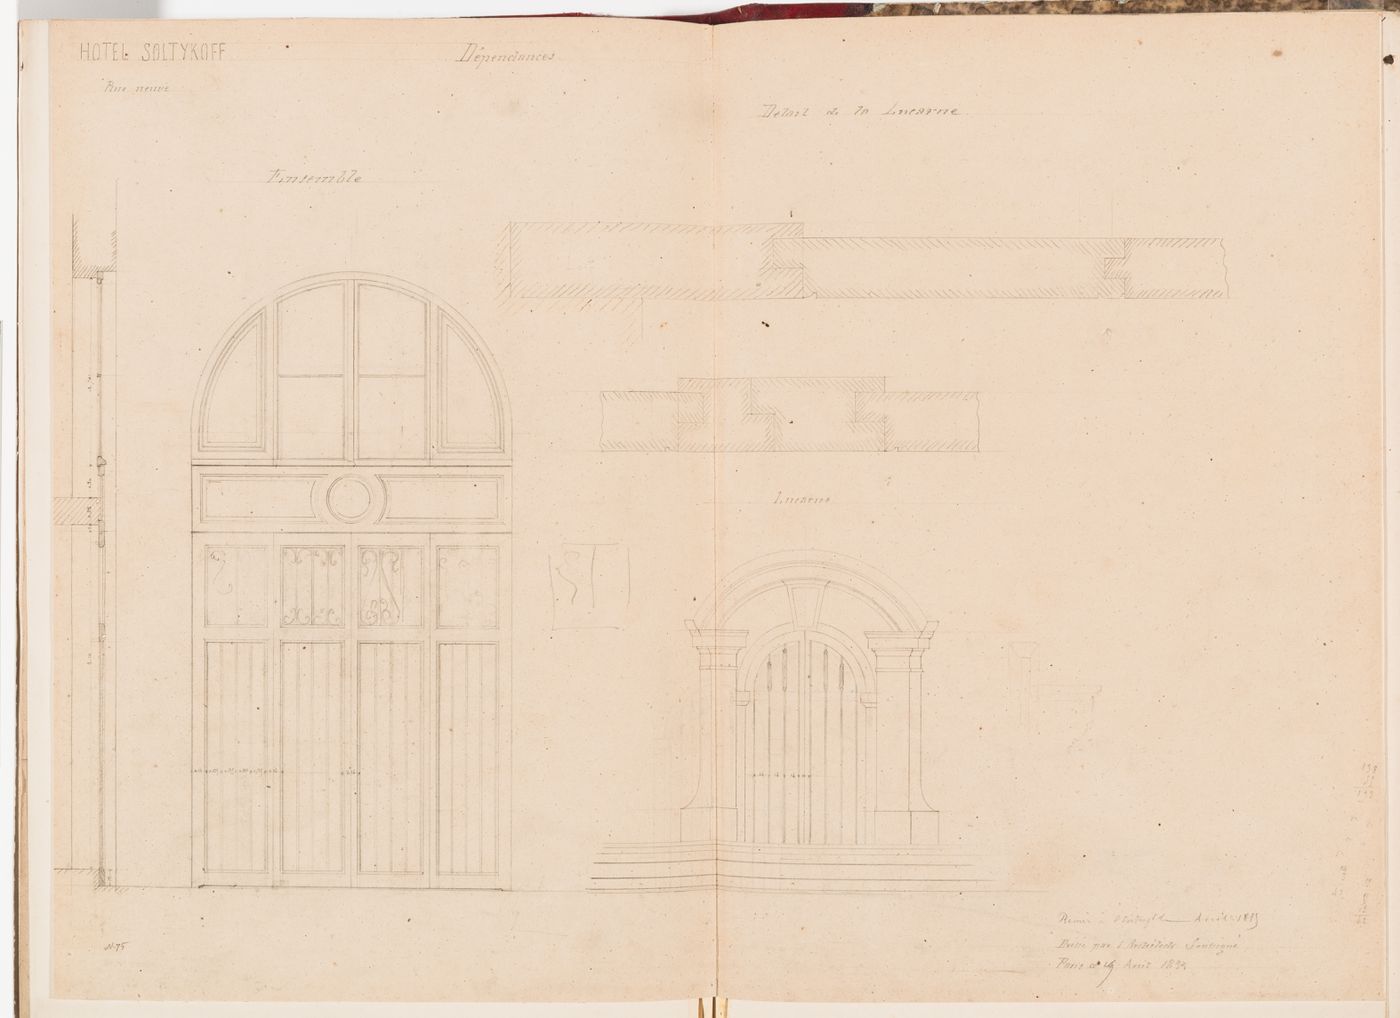 Elevation and wall section for a door and window, and joinery details for a dormer window, both for the outbuilding, Hôtel Soltykoff